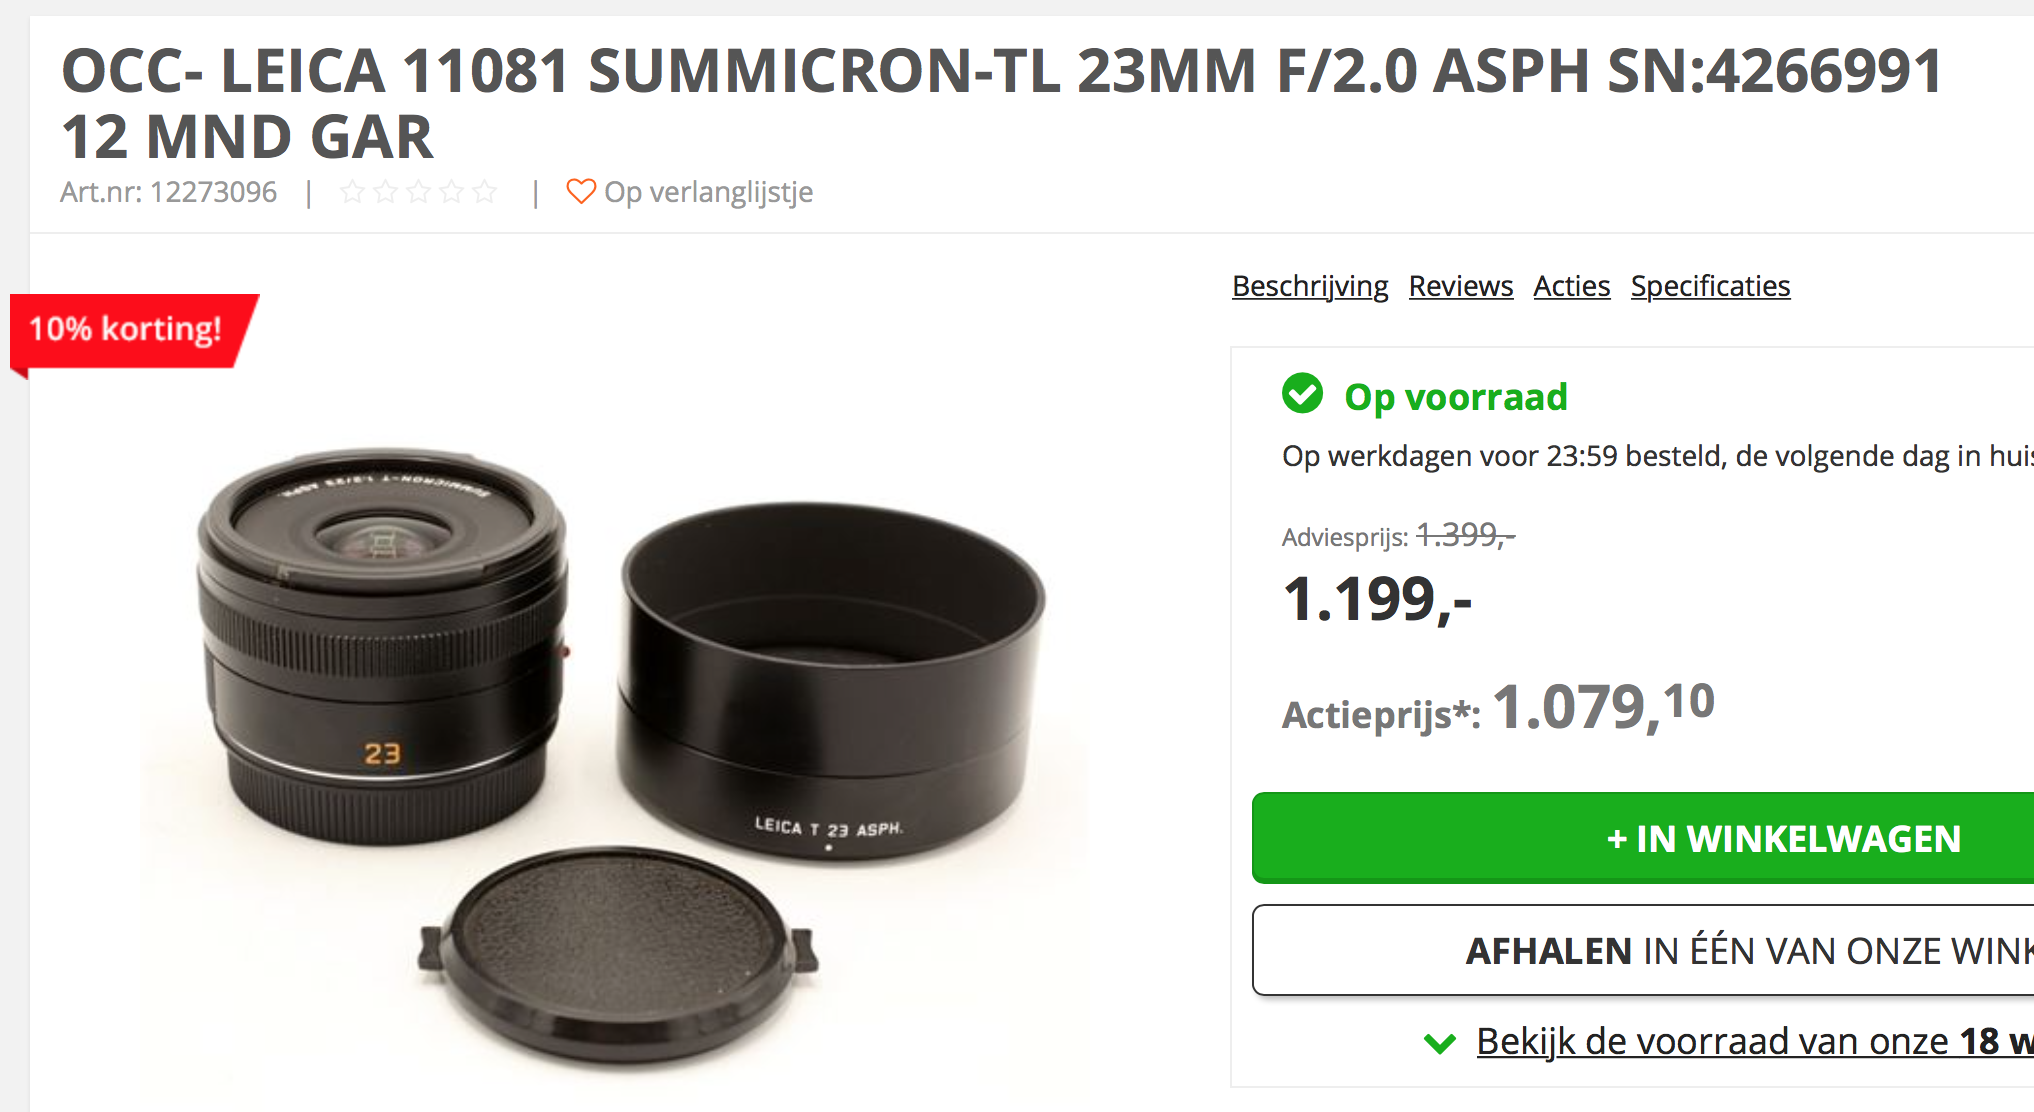 Good deal on occasion Leica 23/2.0 Summicron